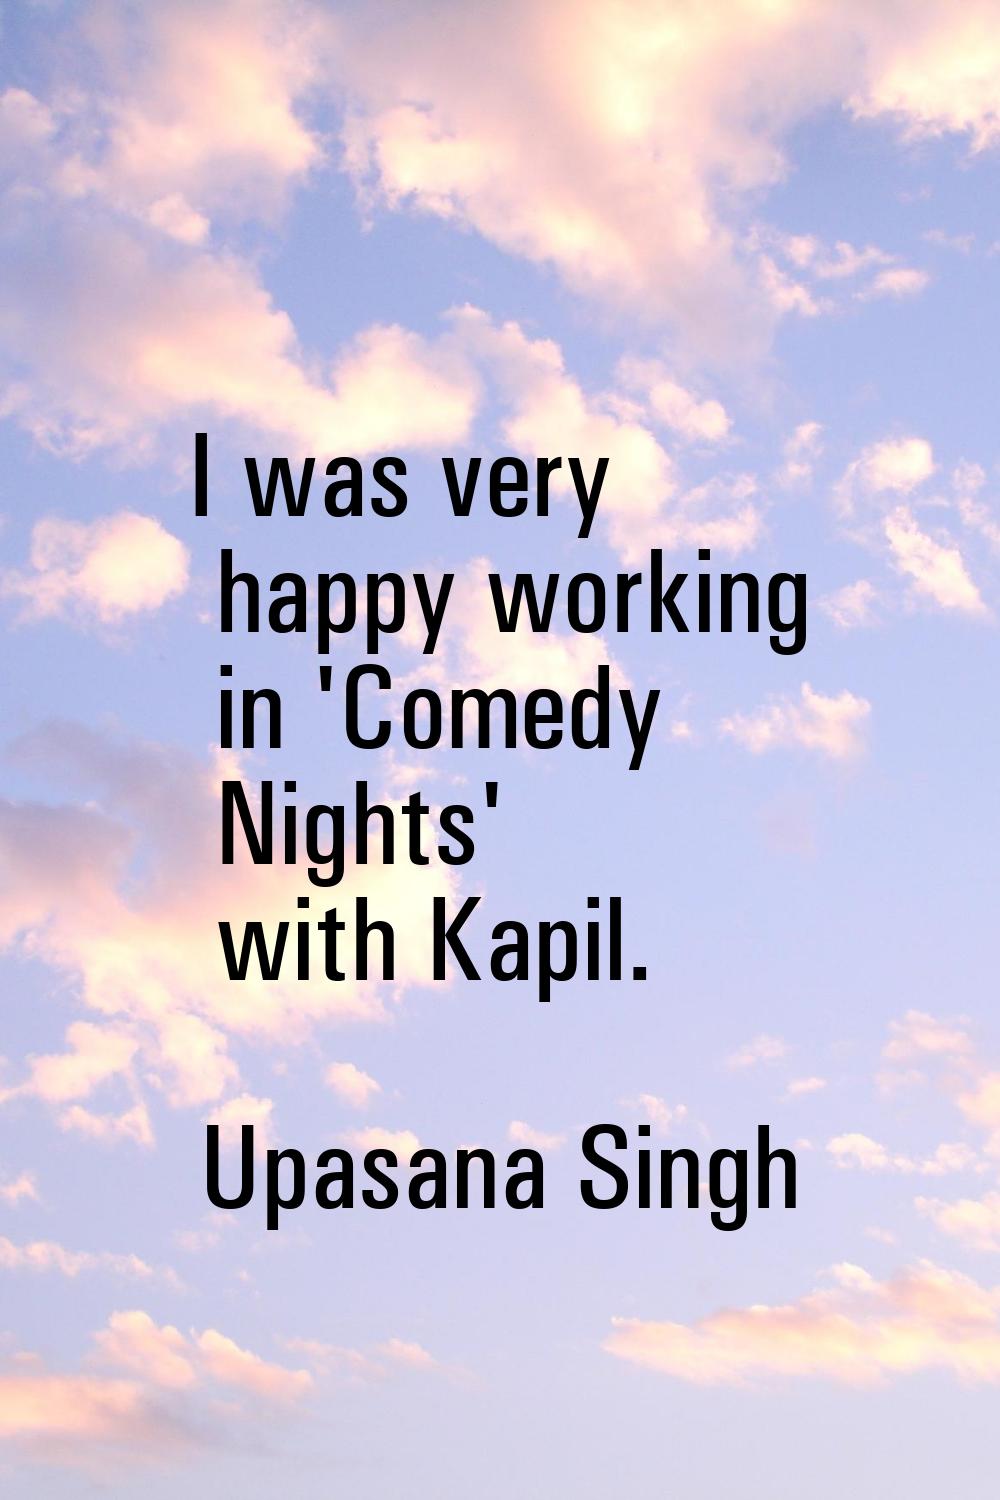 I was very happy working in 'Comedy Nights' with Kapil.